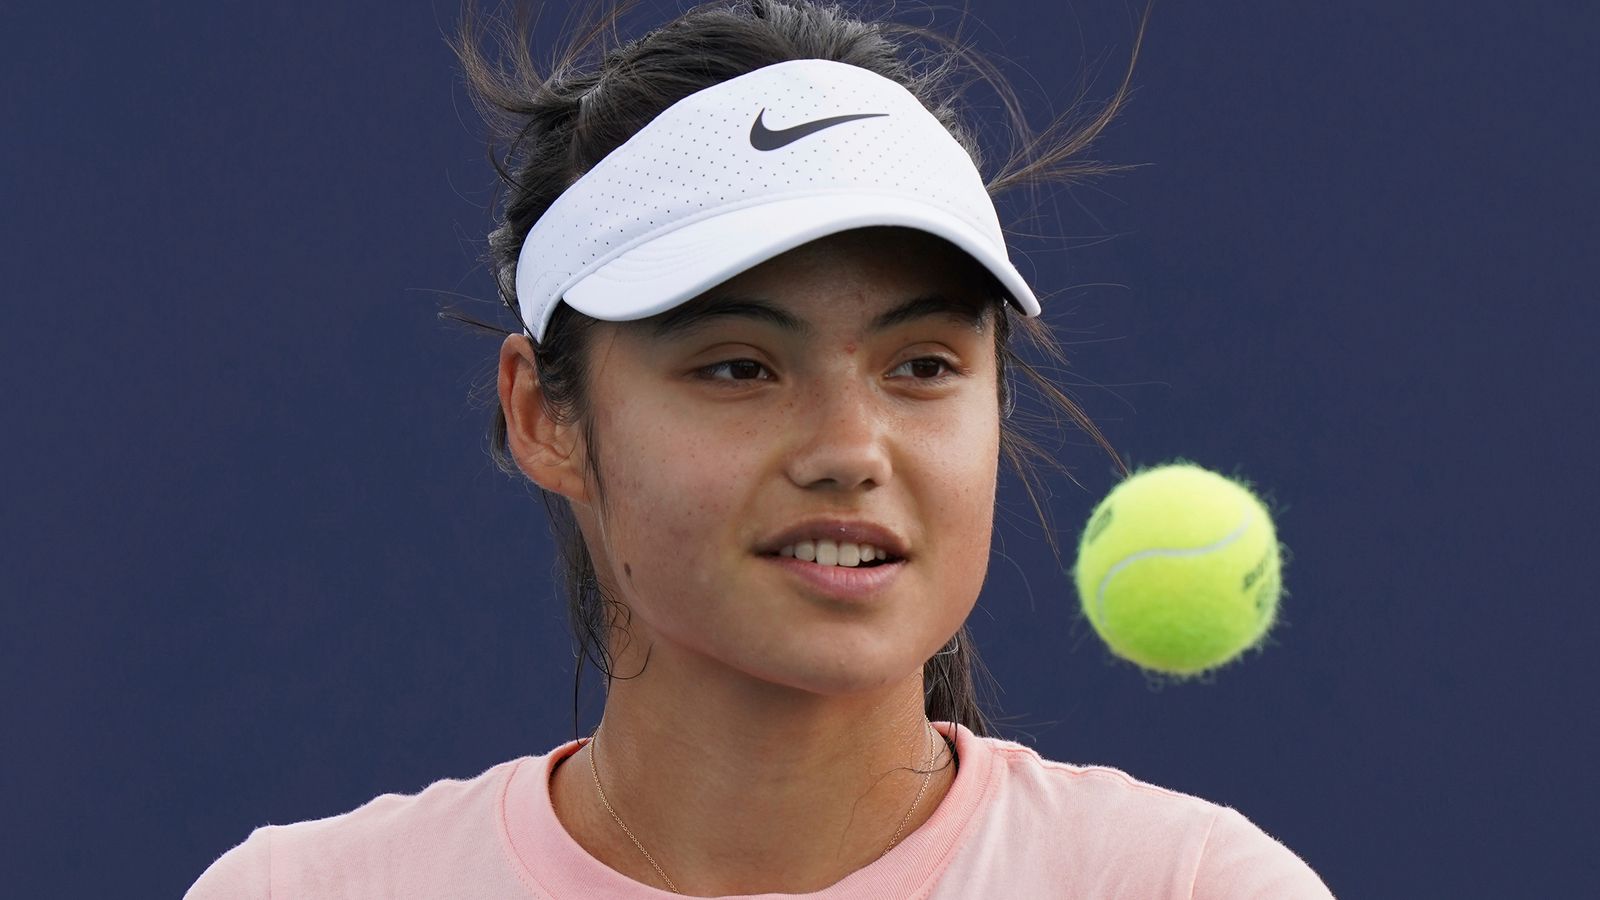 Emma Raducanu: Anne Keothavong on US Open champion and GB's Billie Jean King Cup qualifier in Prague